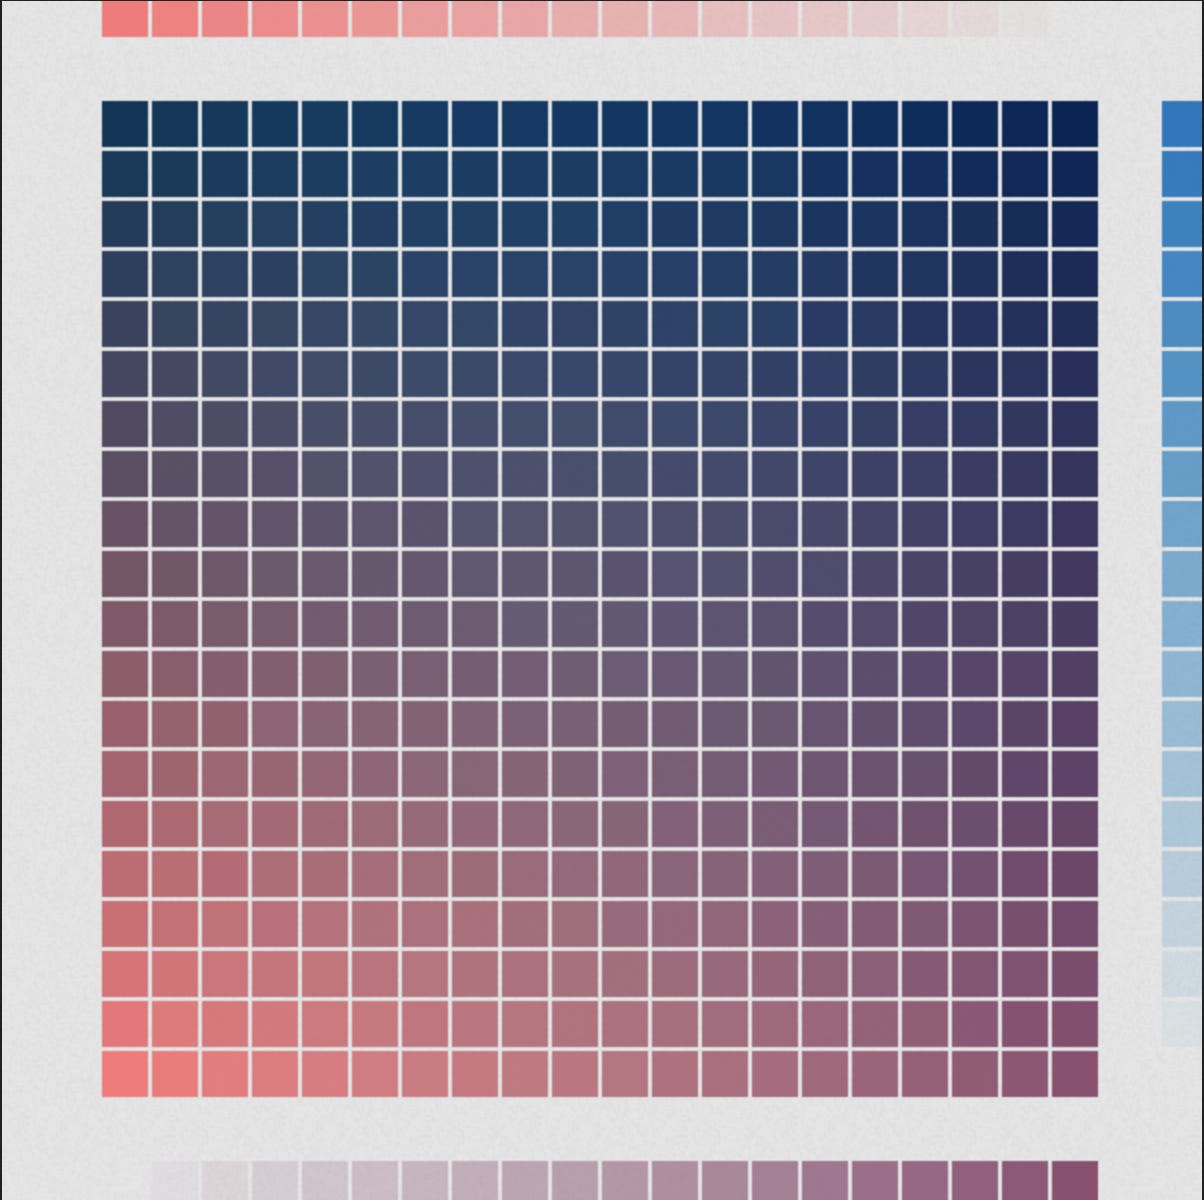 a 20x20 grid created from differing the opacities and blending flourescent orange, blue, and burgundy to create a dusk palette